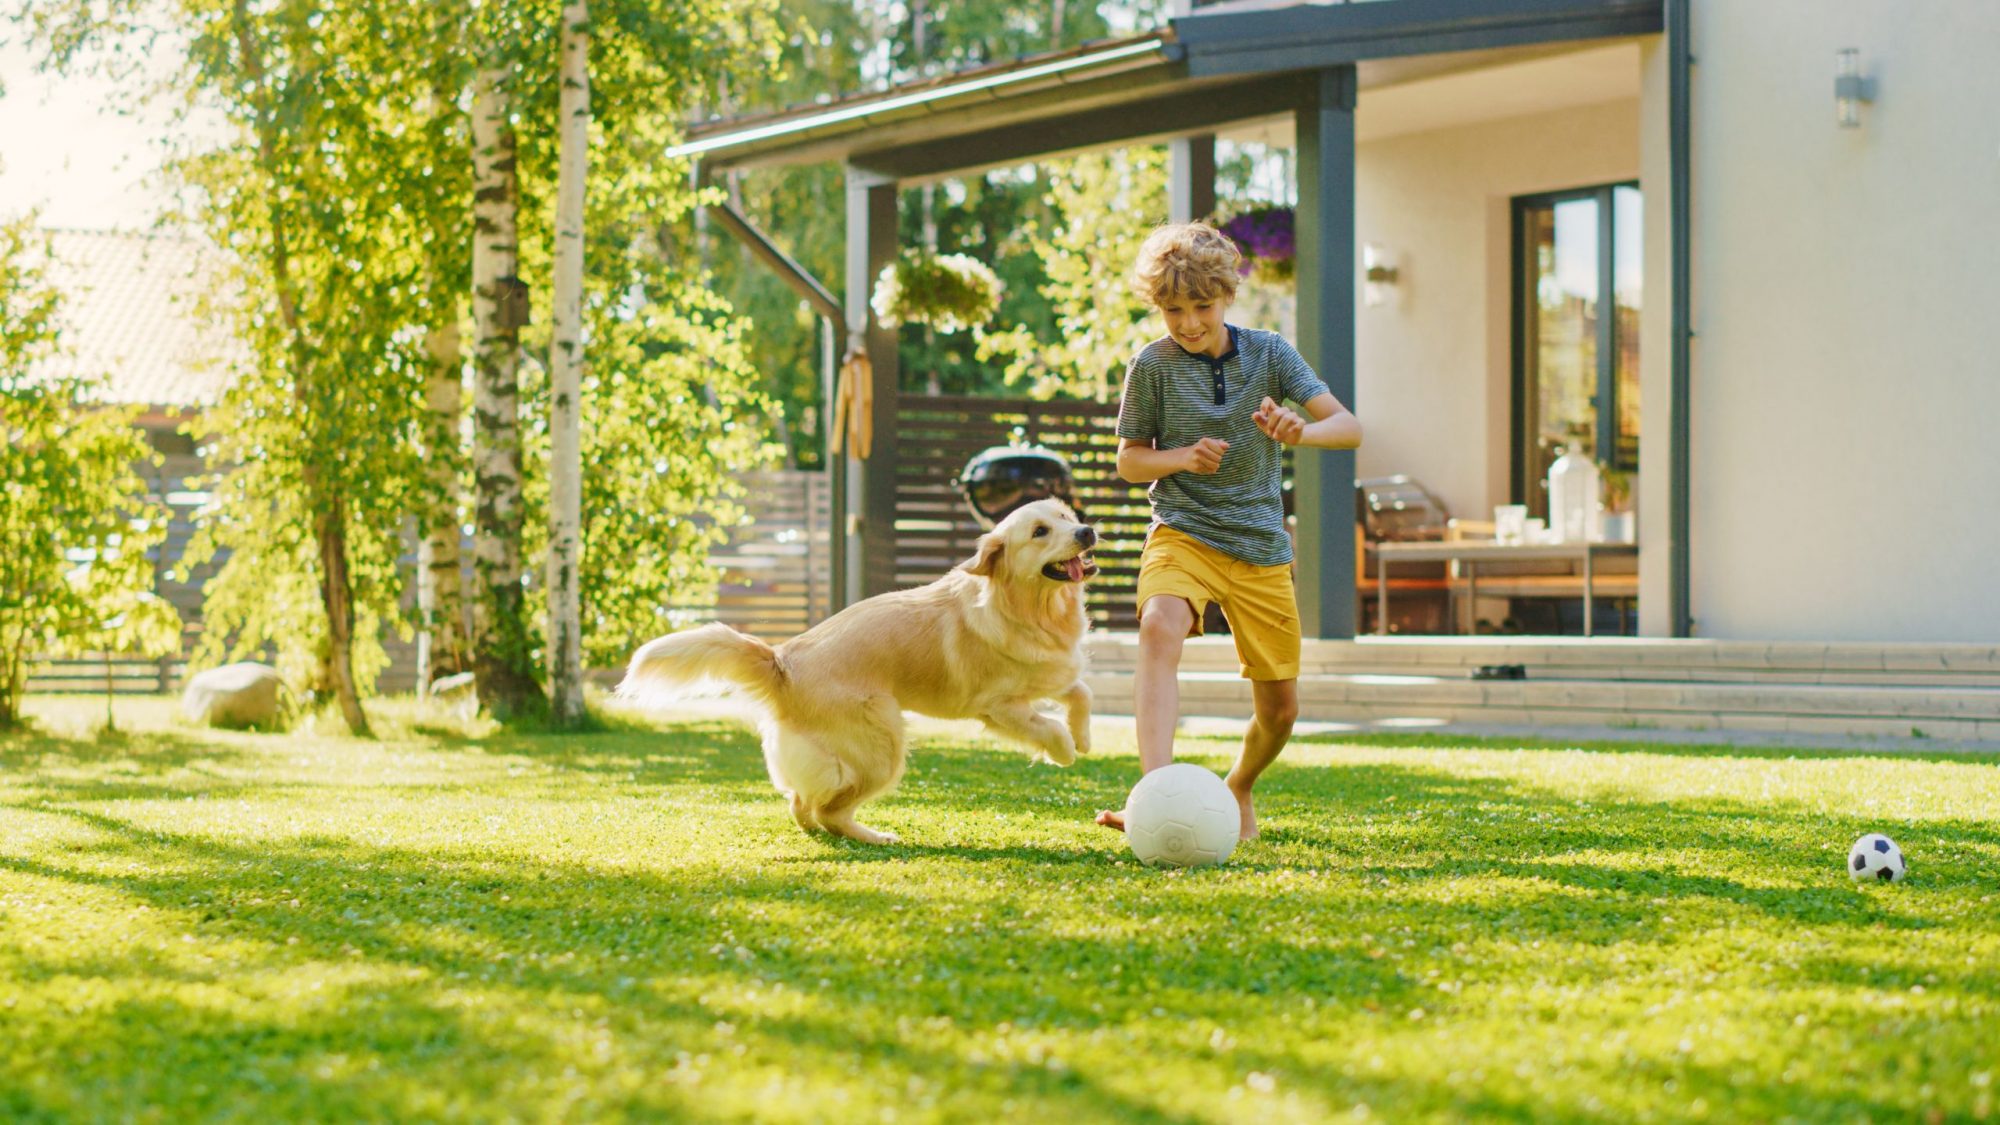 dog and kid playing soccer together outside.